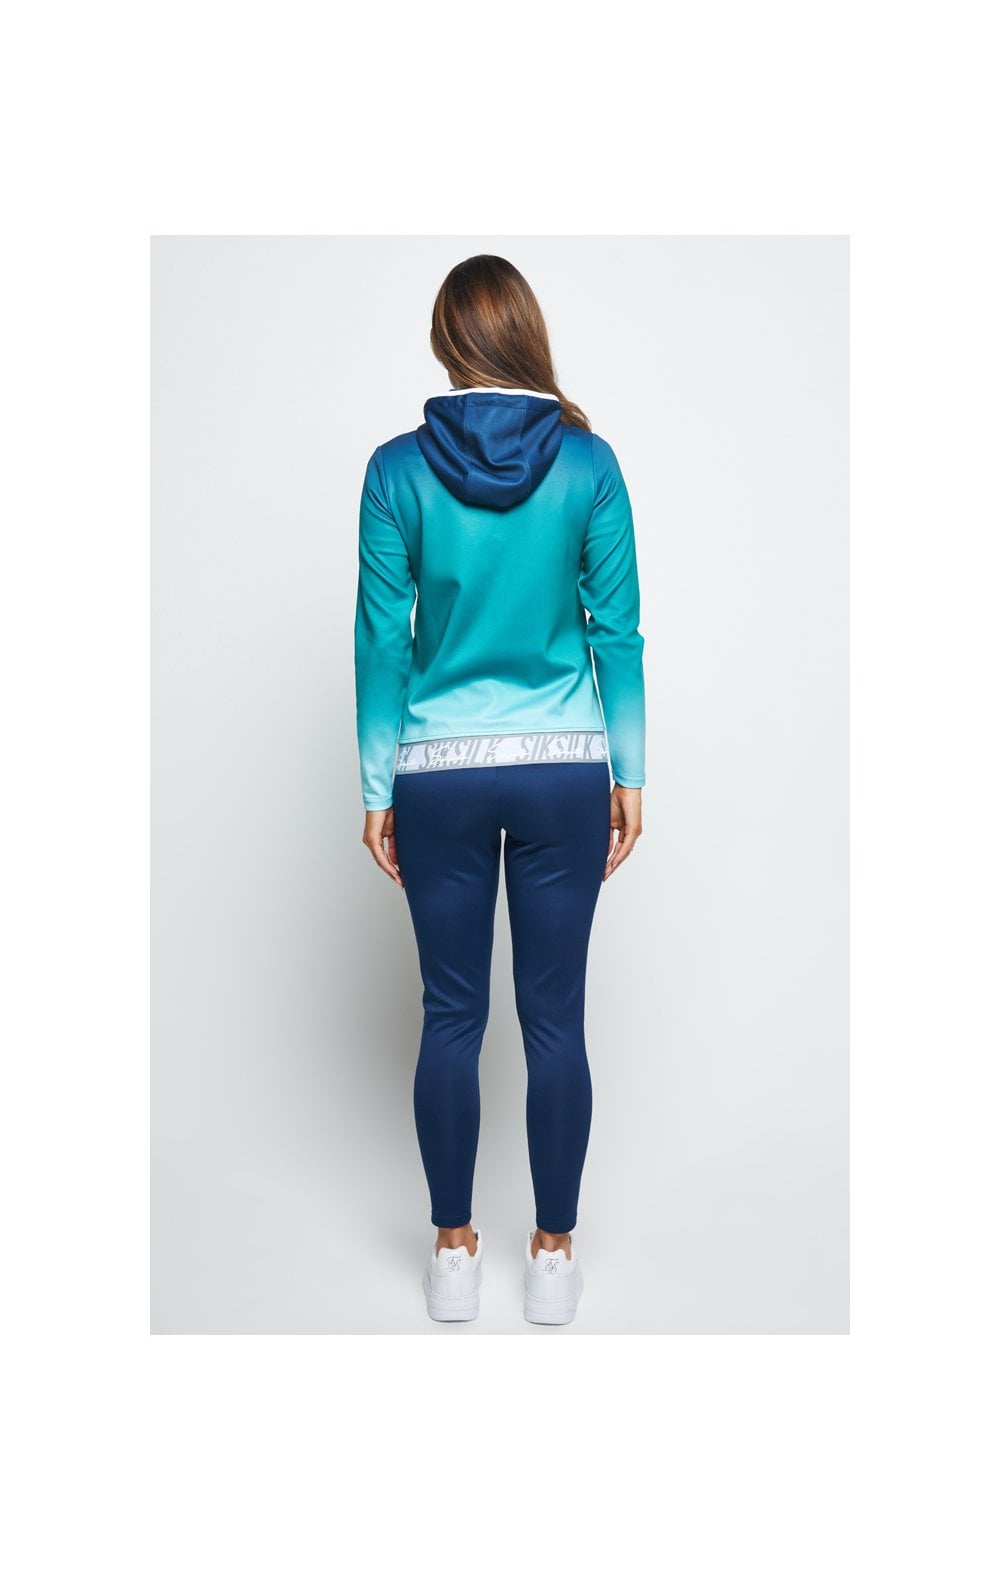 SikSilk Fade Tape Track Jacket - Navy & Teal (5)